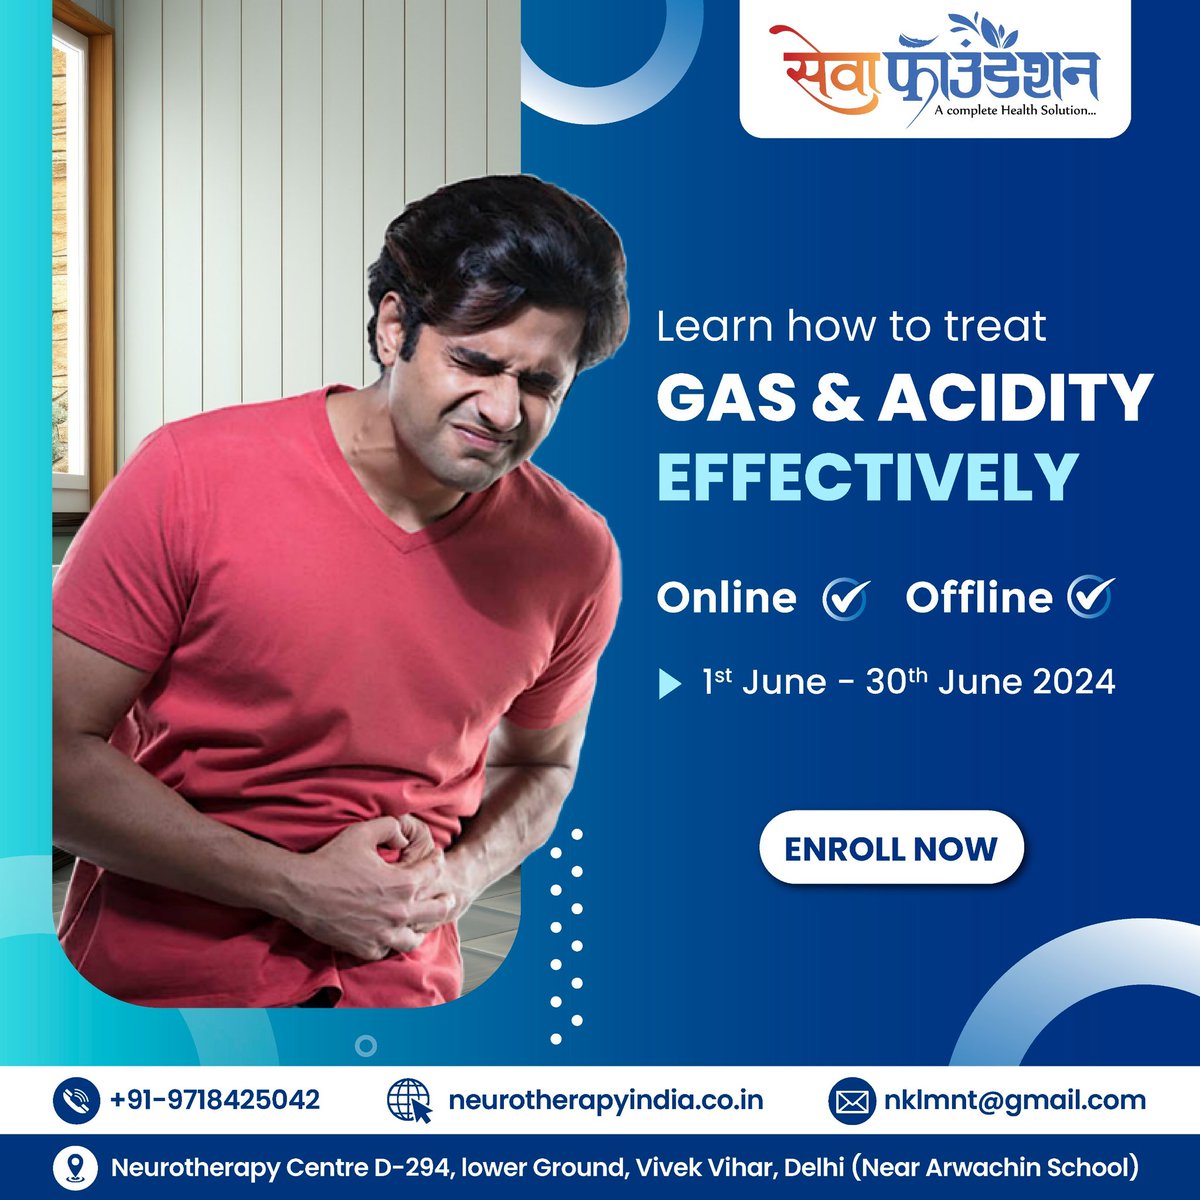 #gastricpain #acidity 
Gastric Problem & Acidity  को ठीक करना सीखें अब
1 Month Neurotherapy Foundation Course को करके
#GastricProblems #aciditytreatment #stomachpai 
Date: 1st June to 30th June 2024| Online & Offline

#Neurptherapy #Neurotherapyfoundationcourse